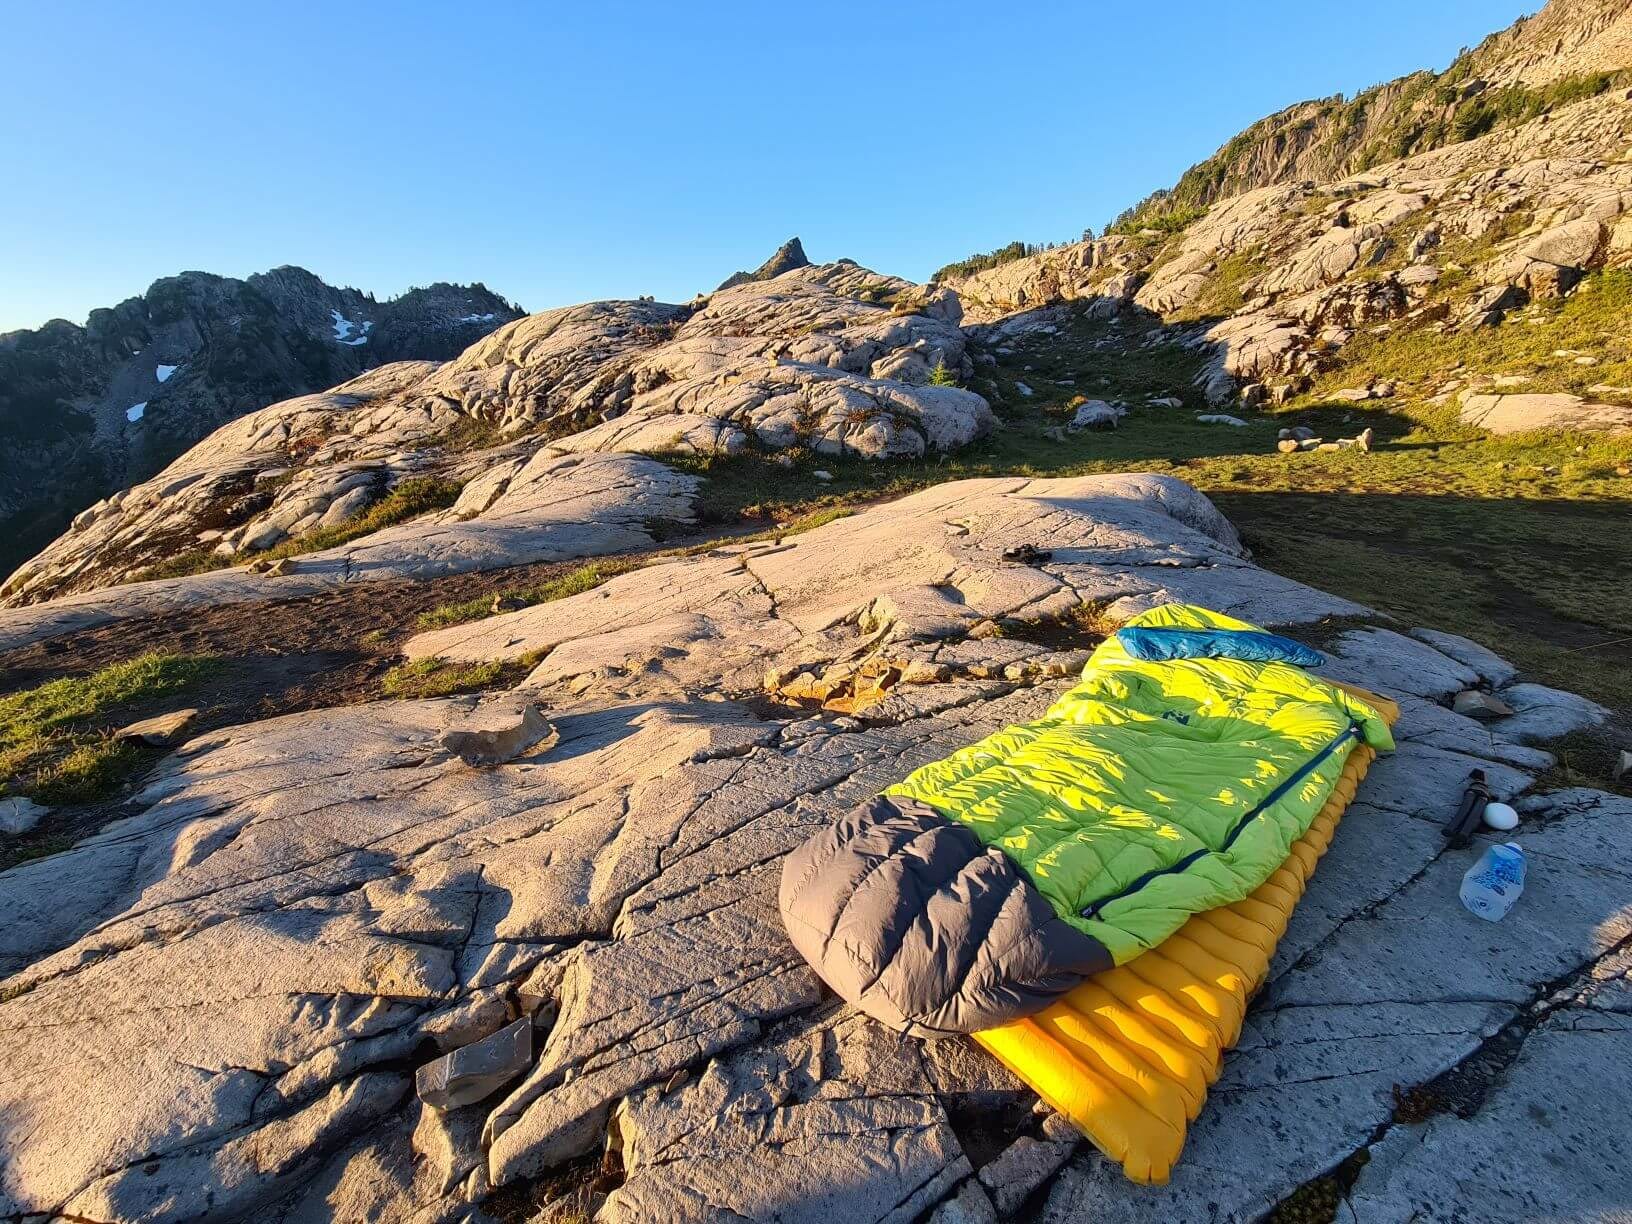 Backpacking Gear on a rock, sleeping bag and pad